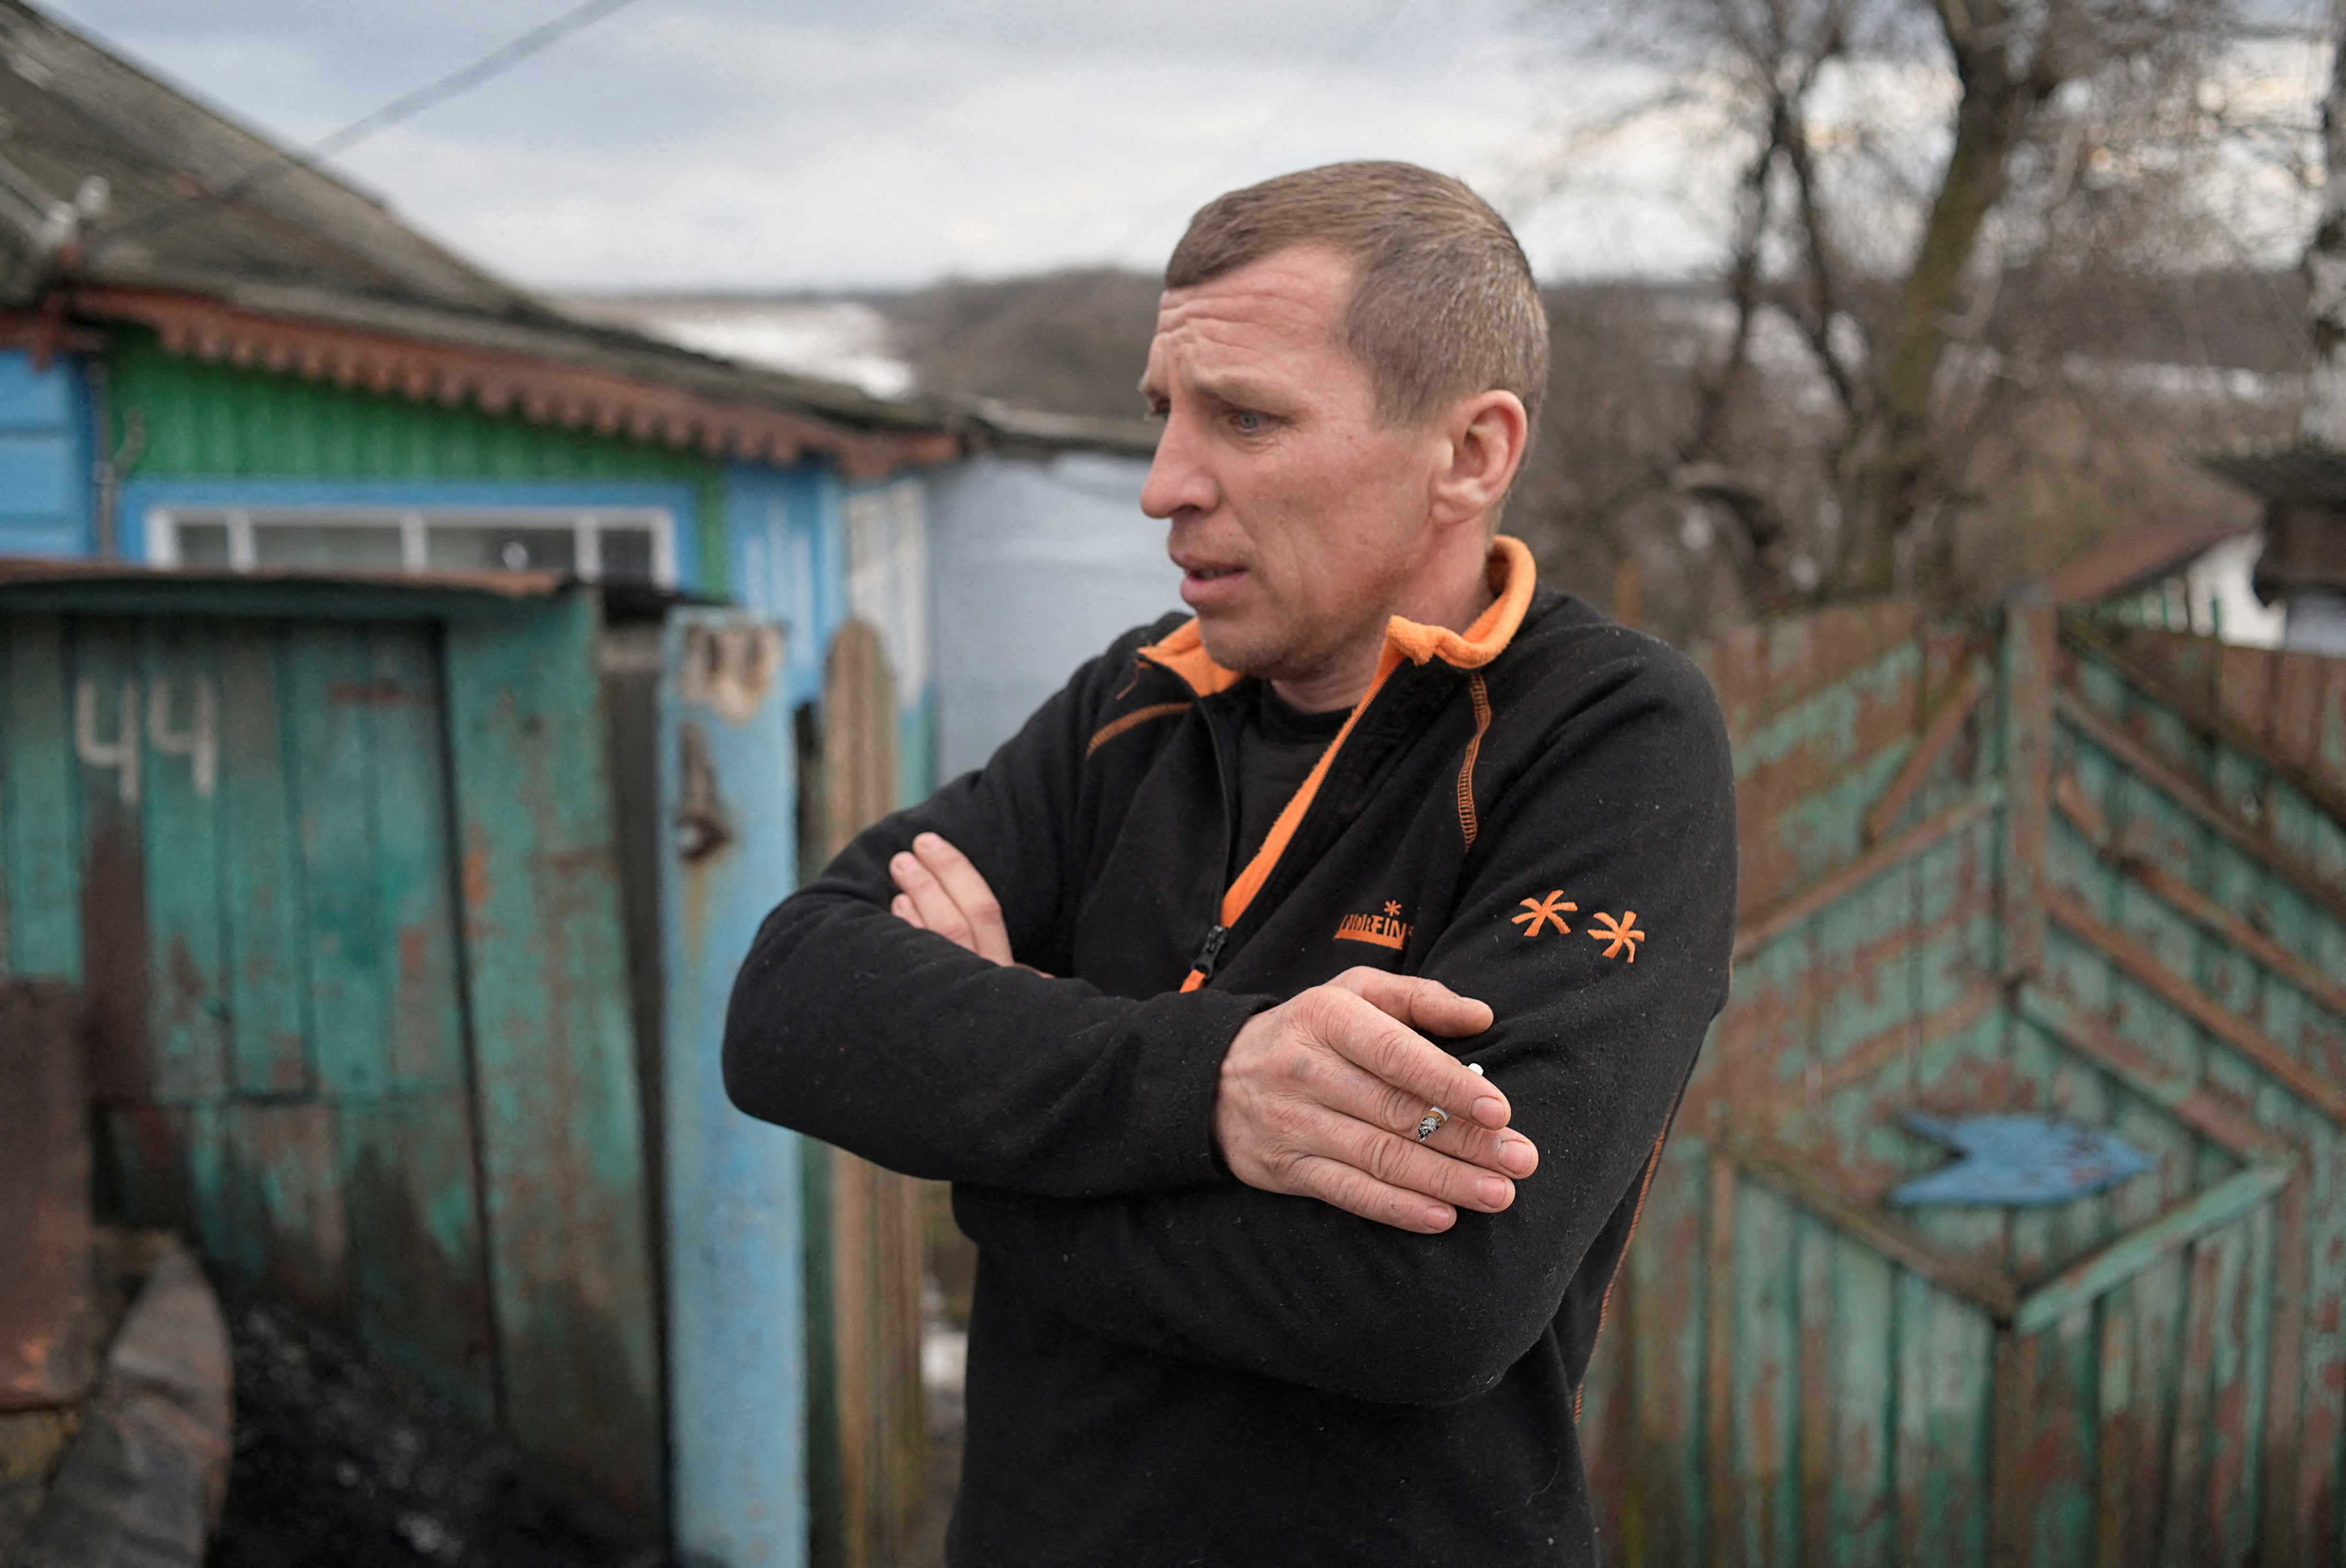 Local resident Serhiy smokes near his house in the village of Katerynivka in Luhansk Region